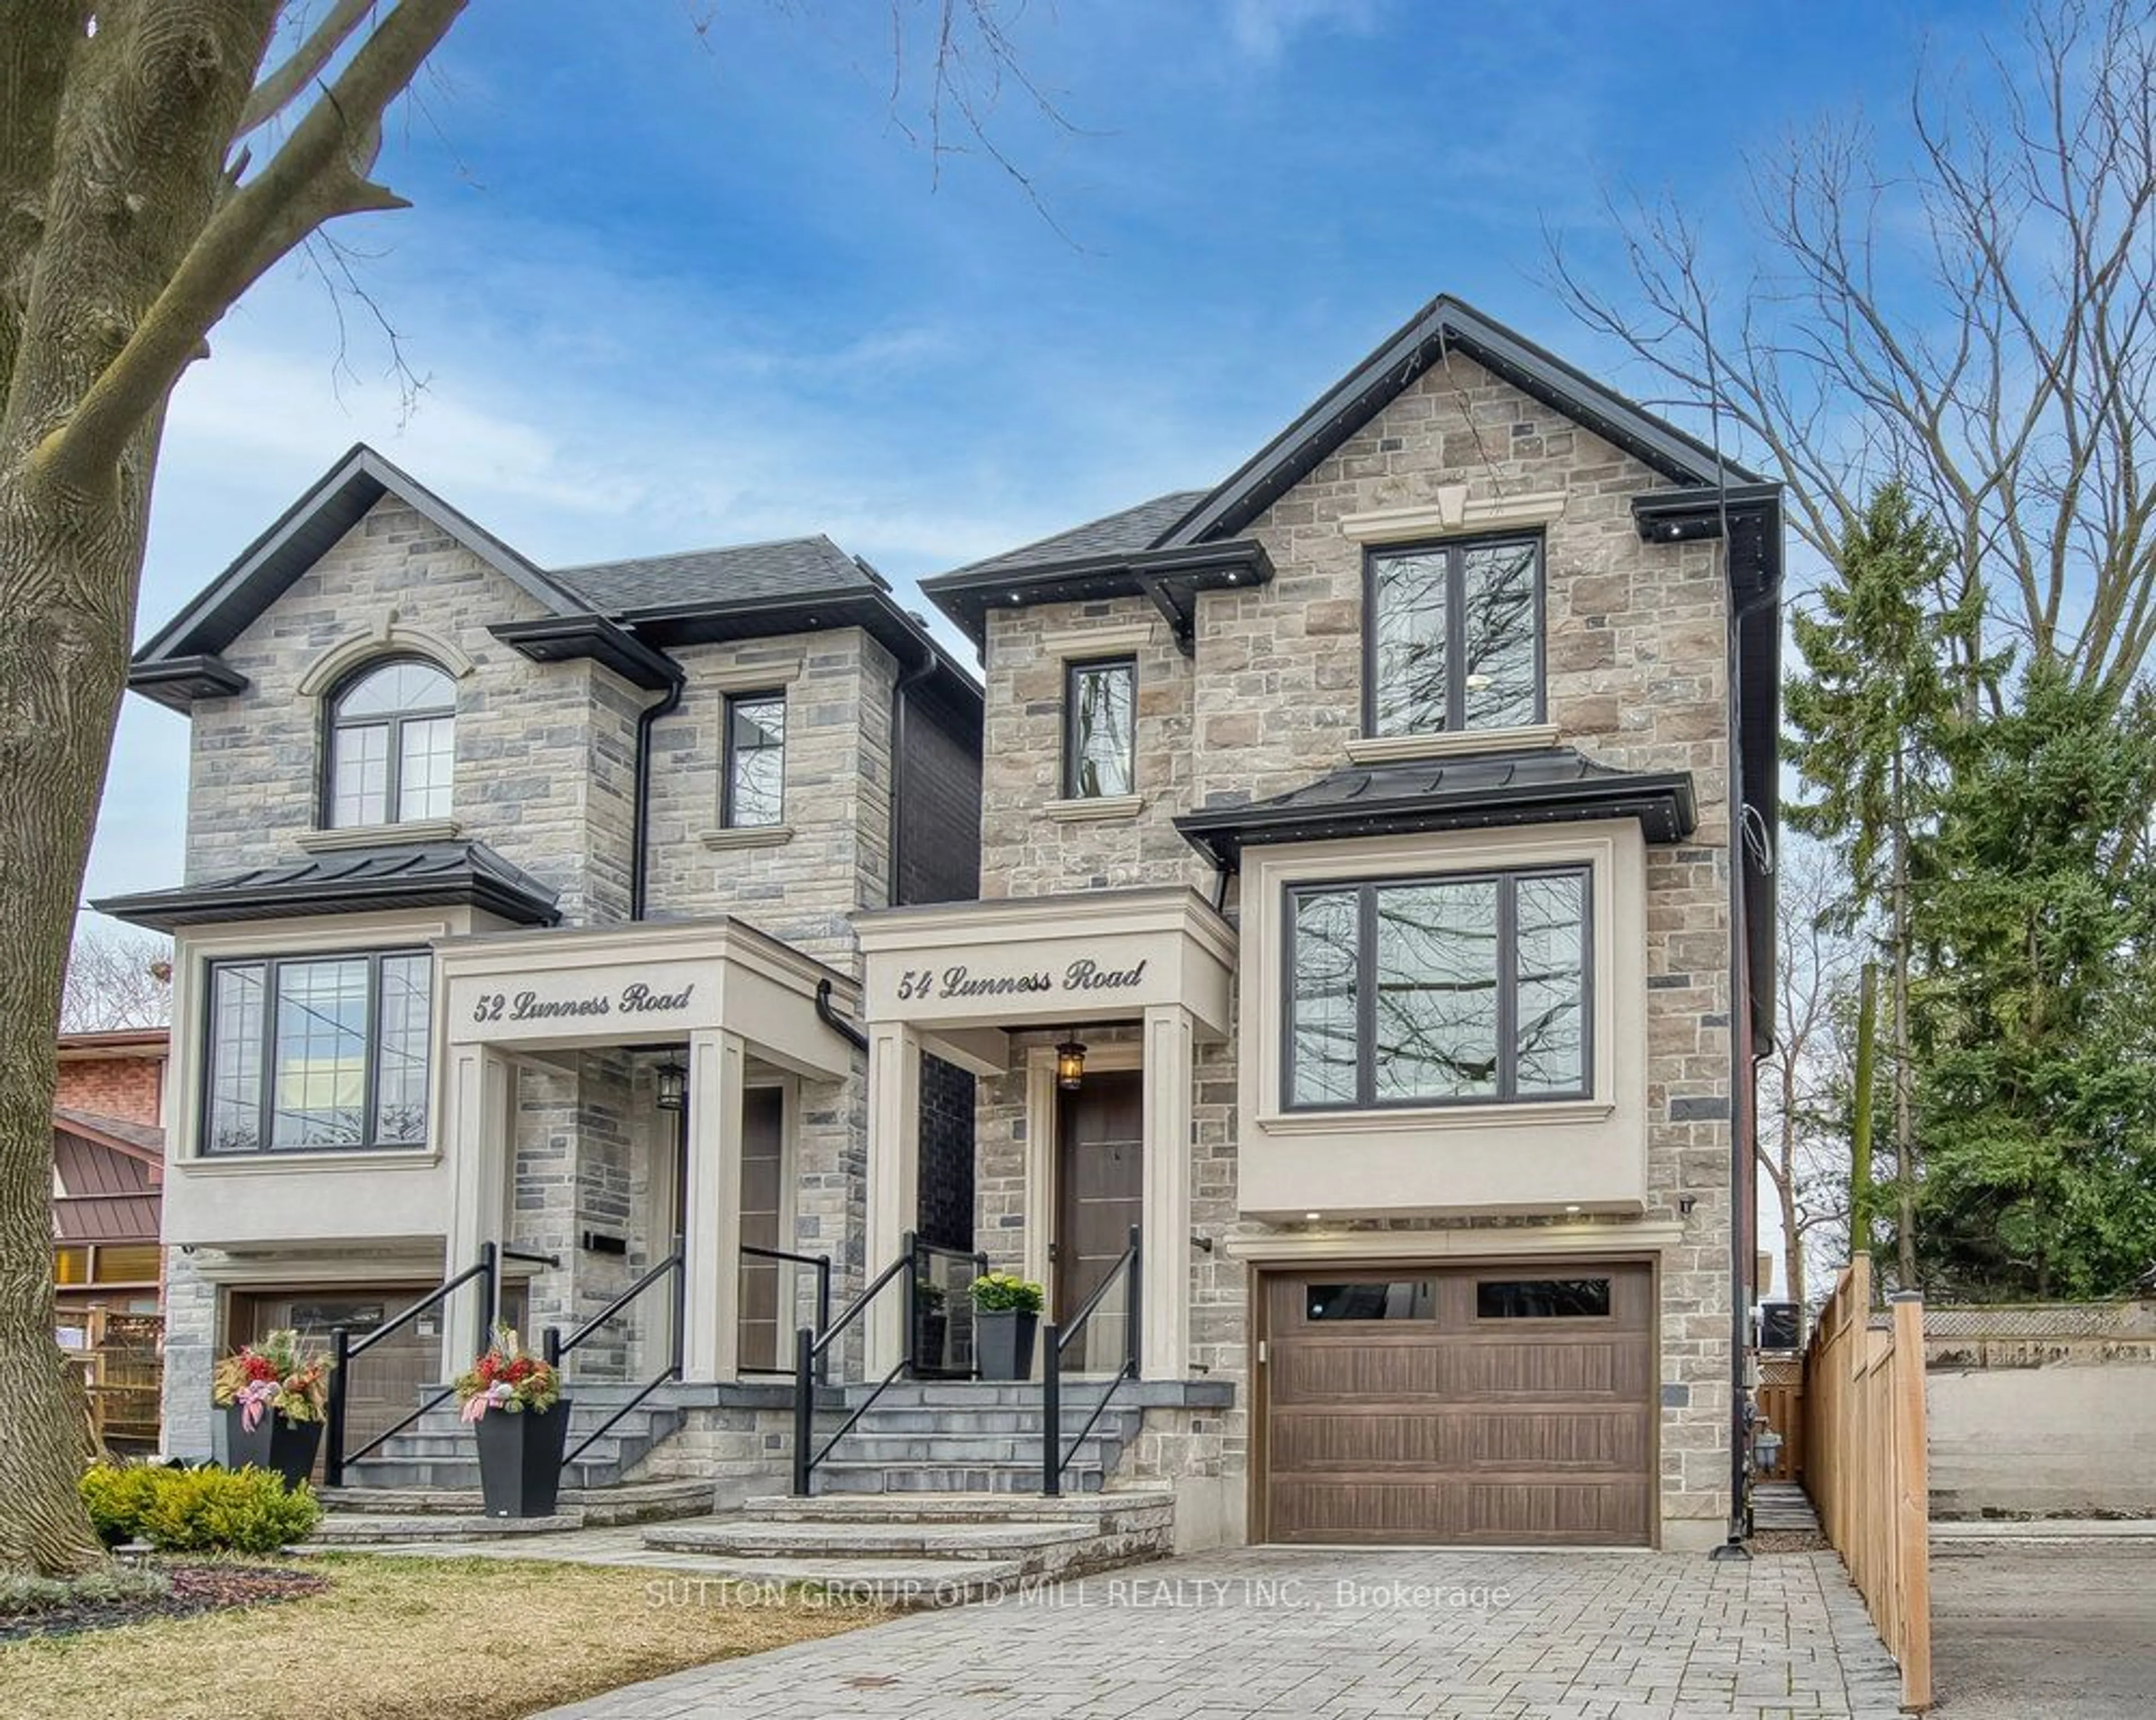 Home with brick exterior material for 54 Lunness Rd, Toronto Ontario M8W 4M6